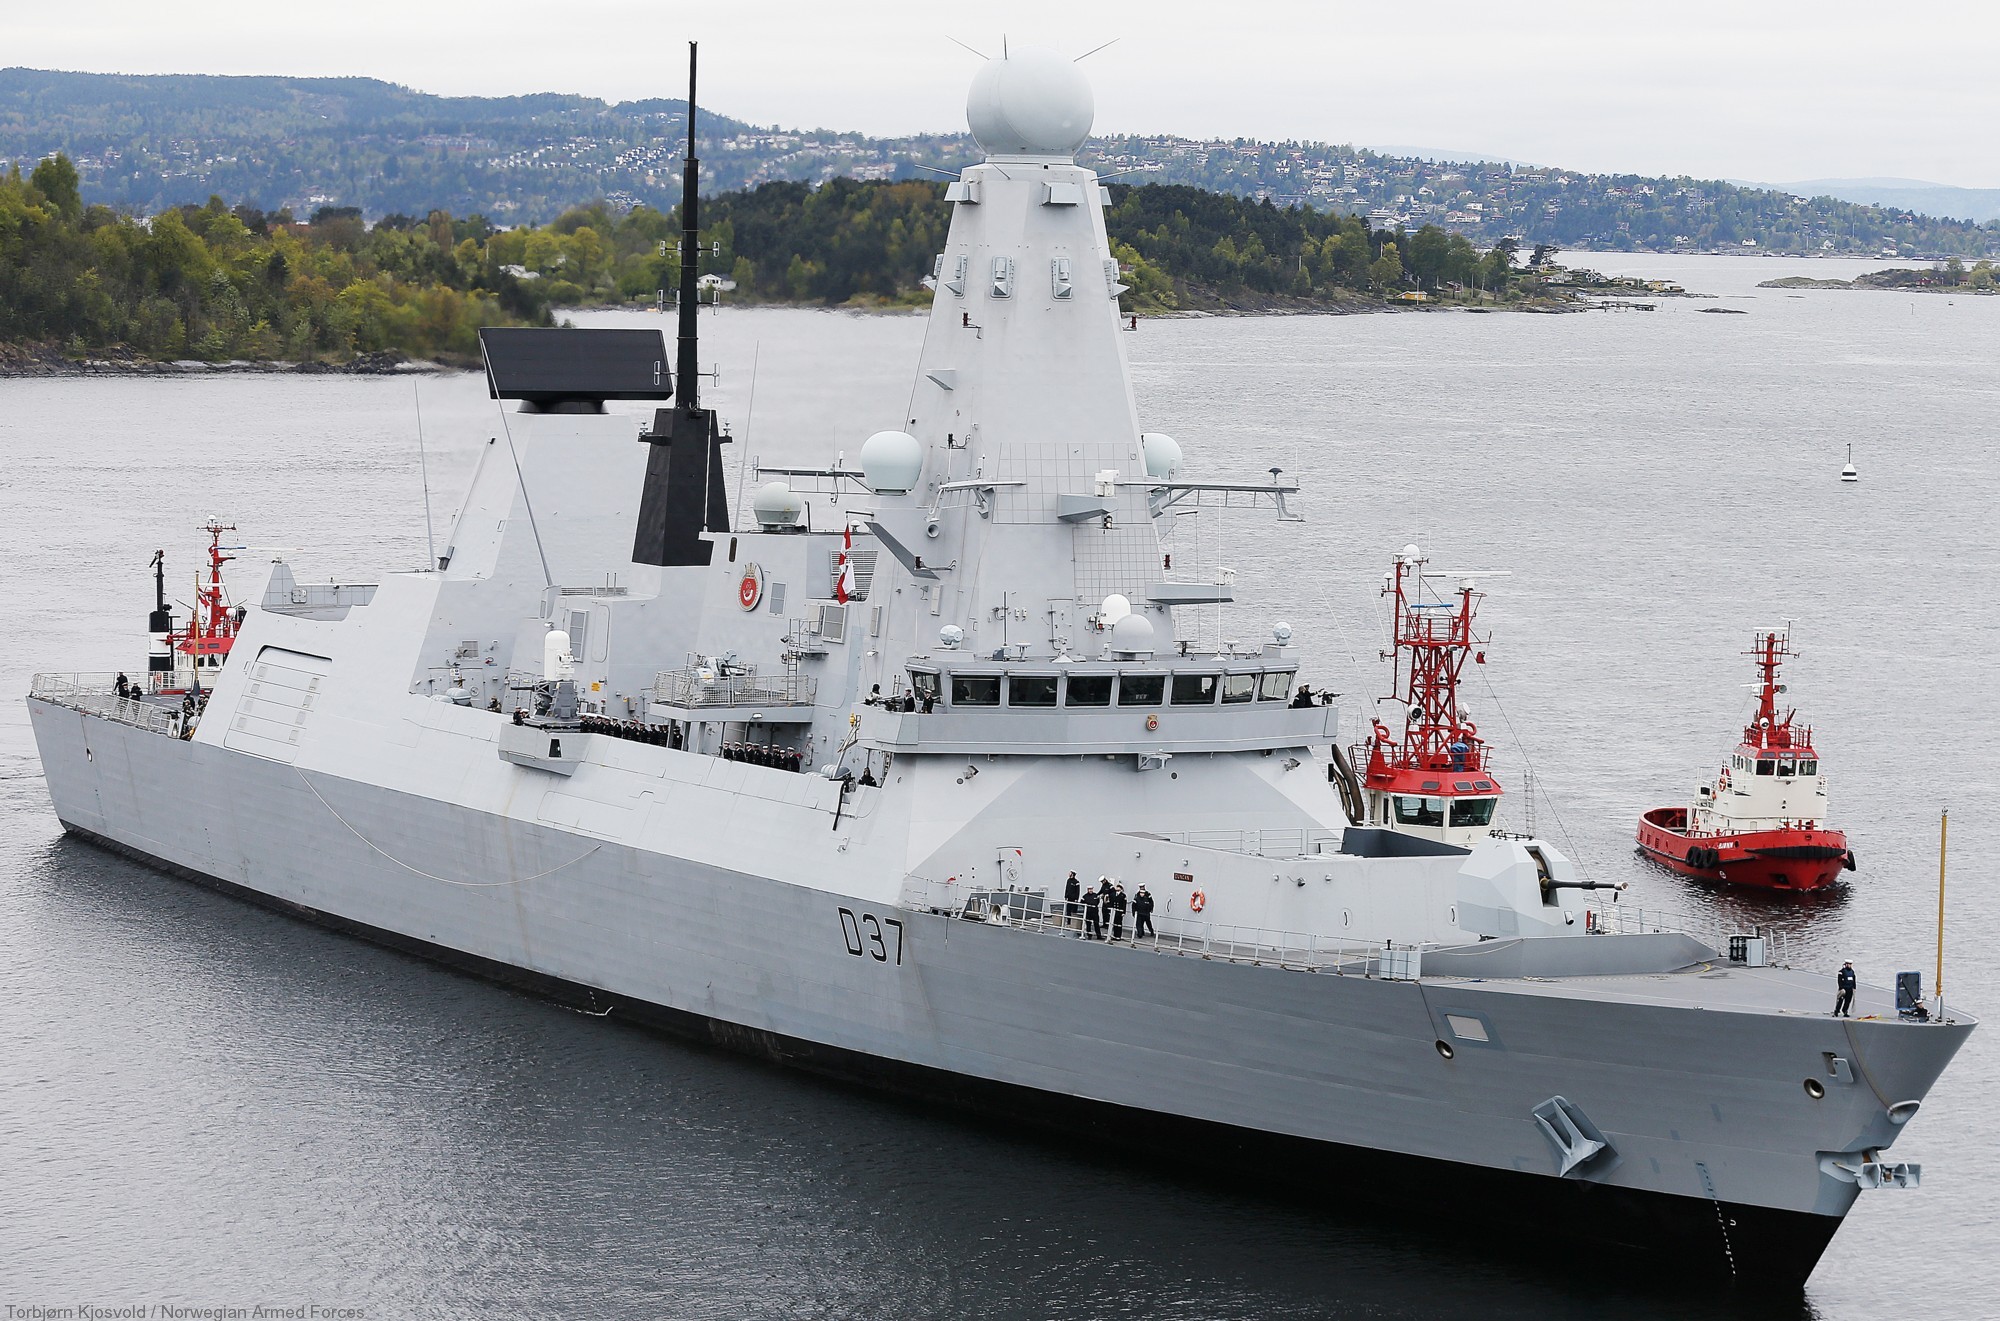 hms duncan d-37 type 45 daring class guided missile destroyer ddg royal navy sea viper paams 39